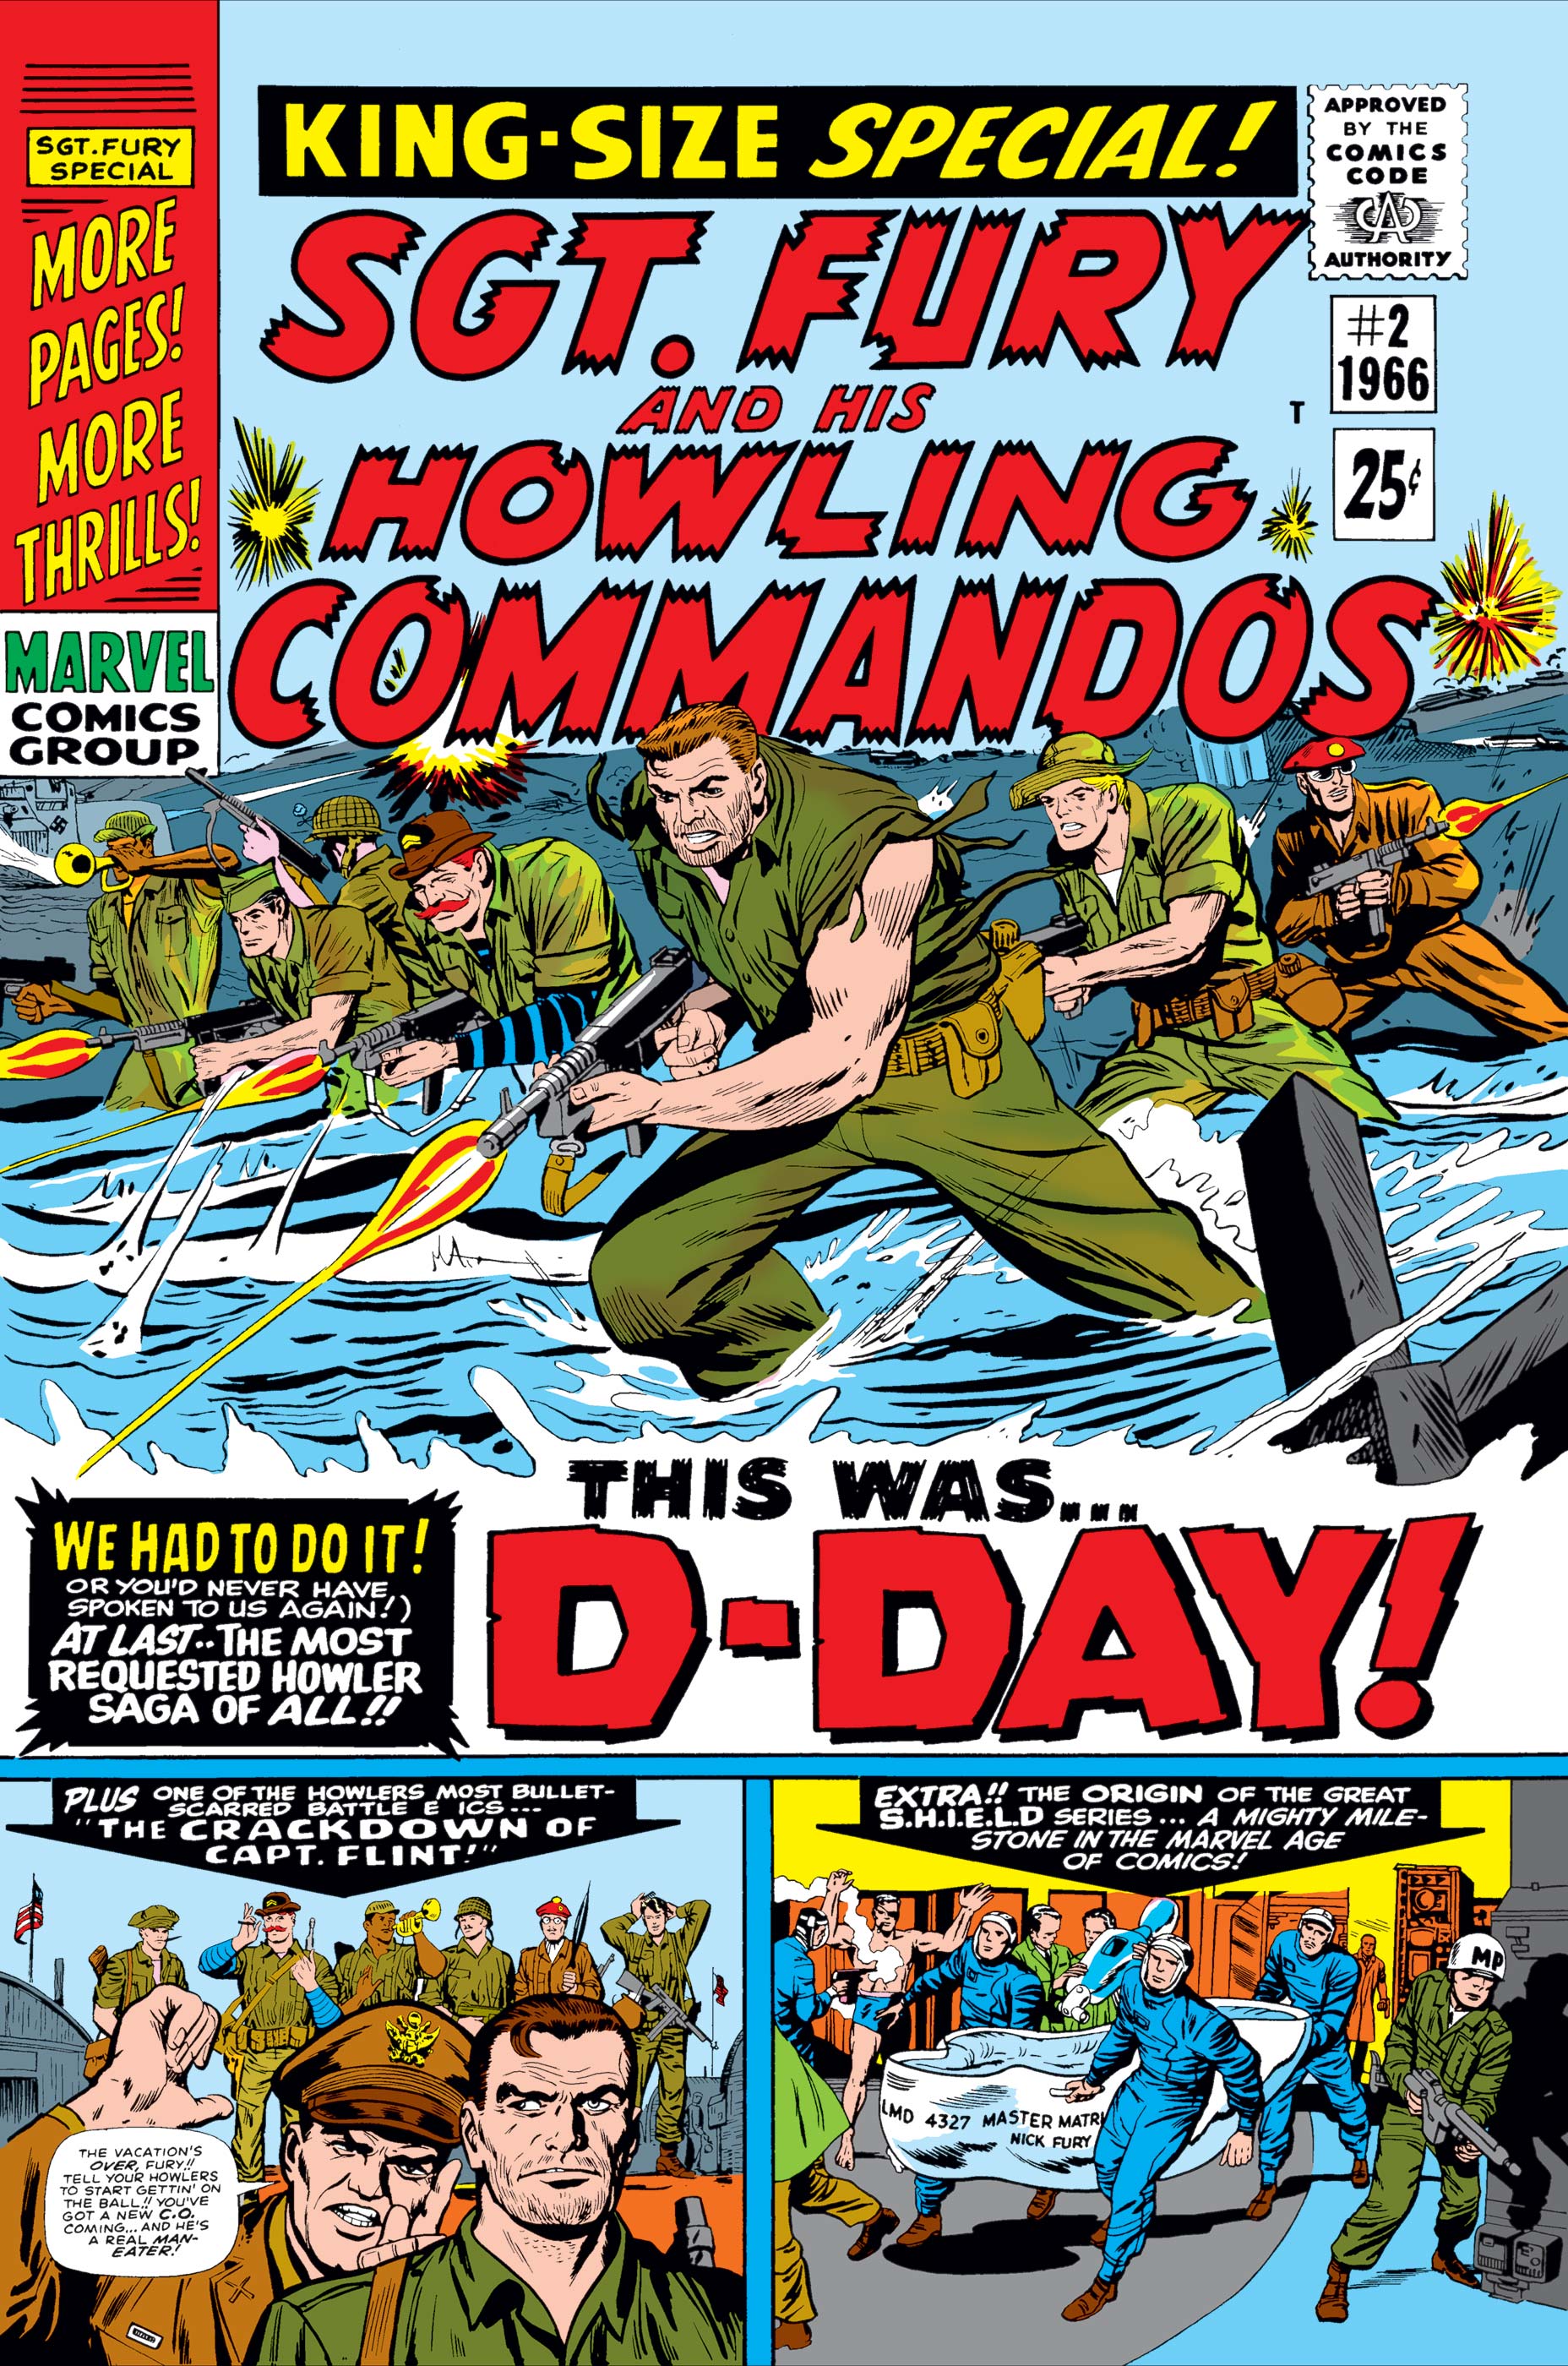 Sgt. Fury and His Howling Commandos Annual (1965) #2